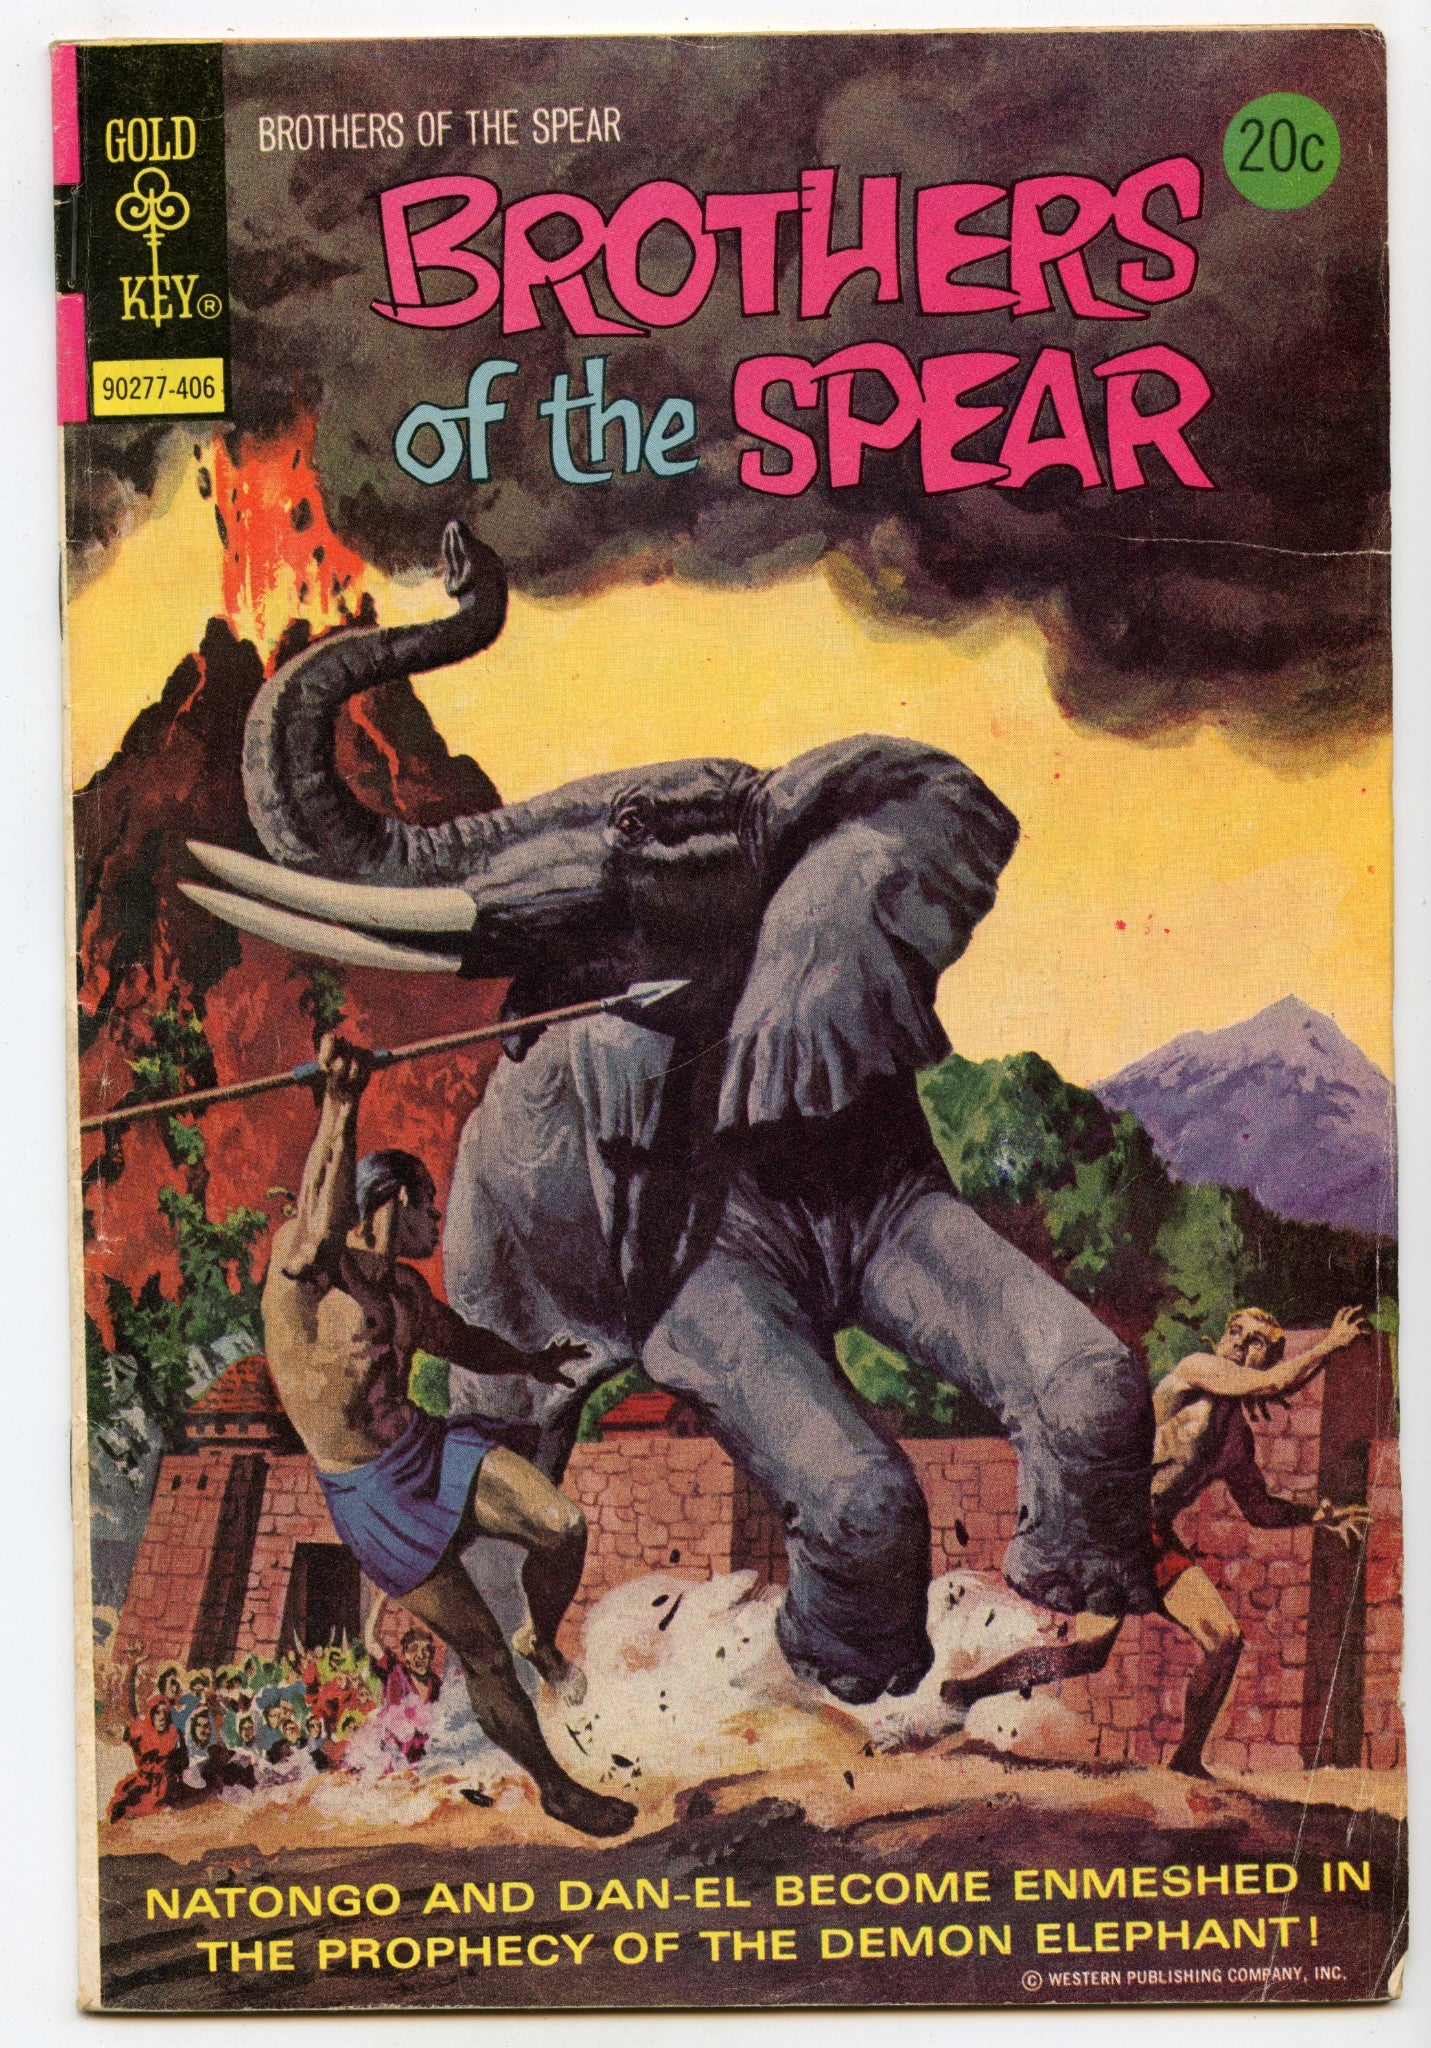 Brothers of the Spear 9 (Jun 1974) VG+ (4.5)